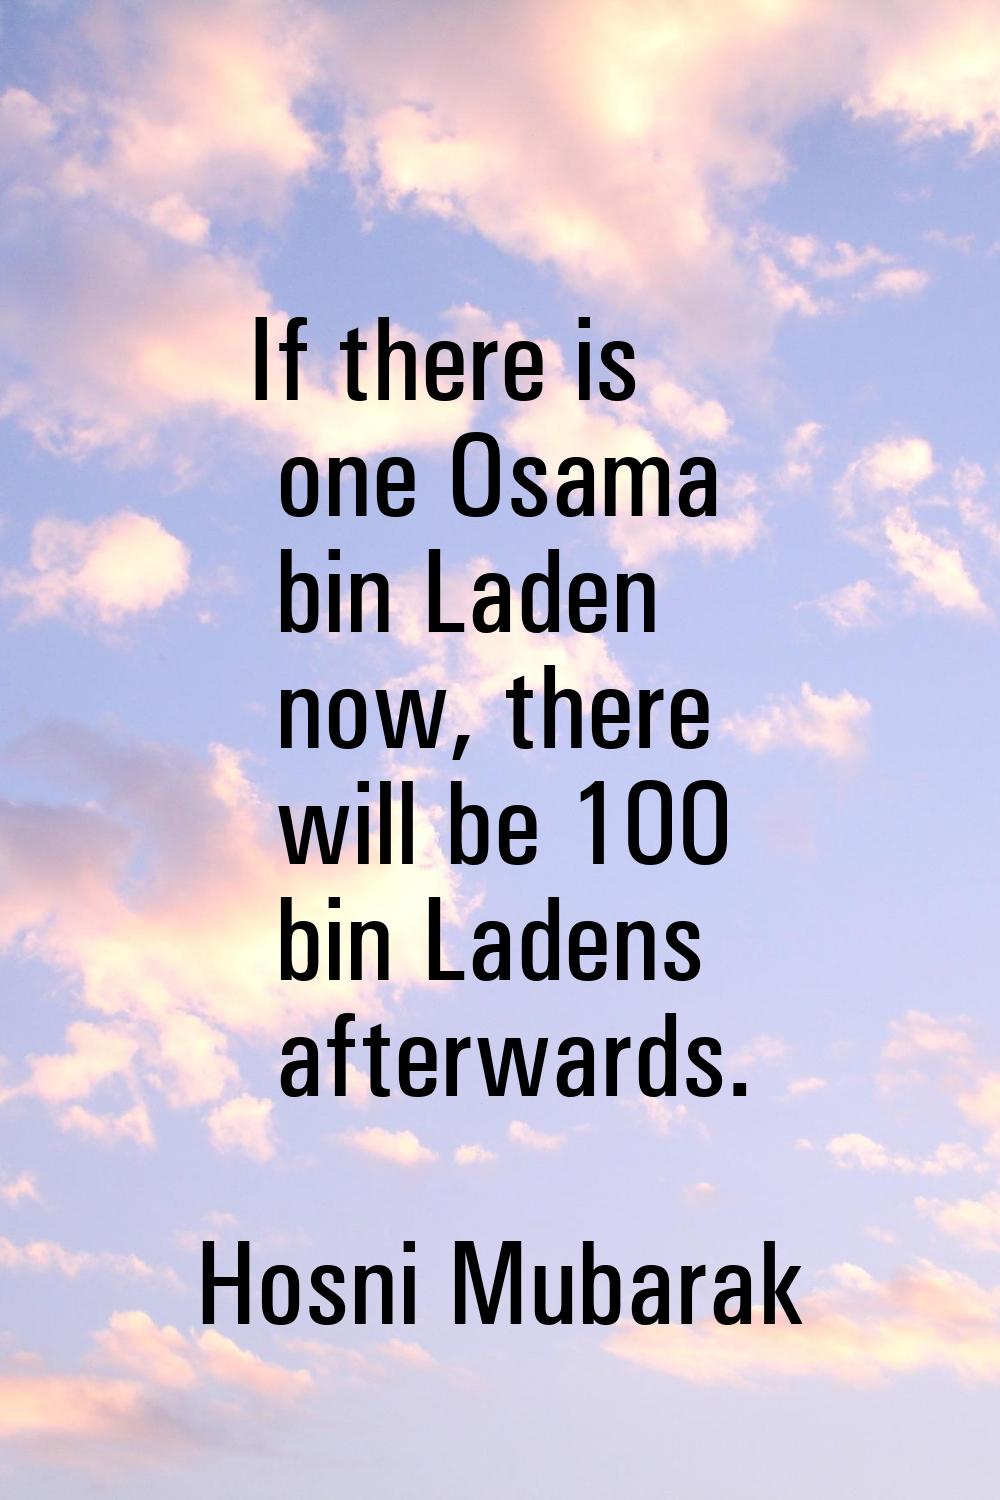 If there is one Osama bin Laden now, there will be 100 bin Ladens afterwards.